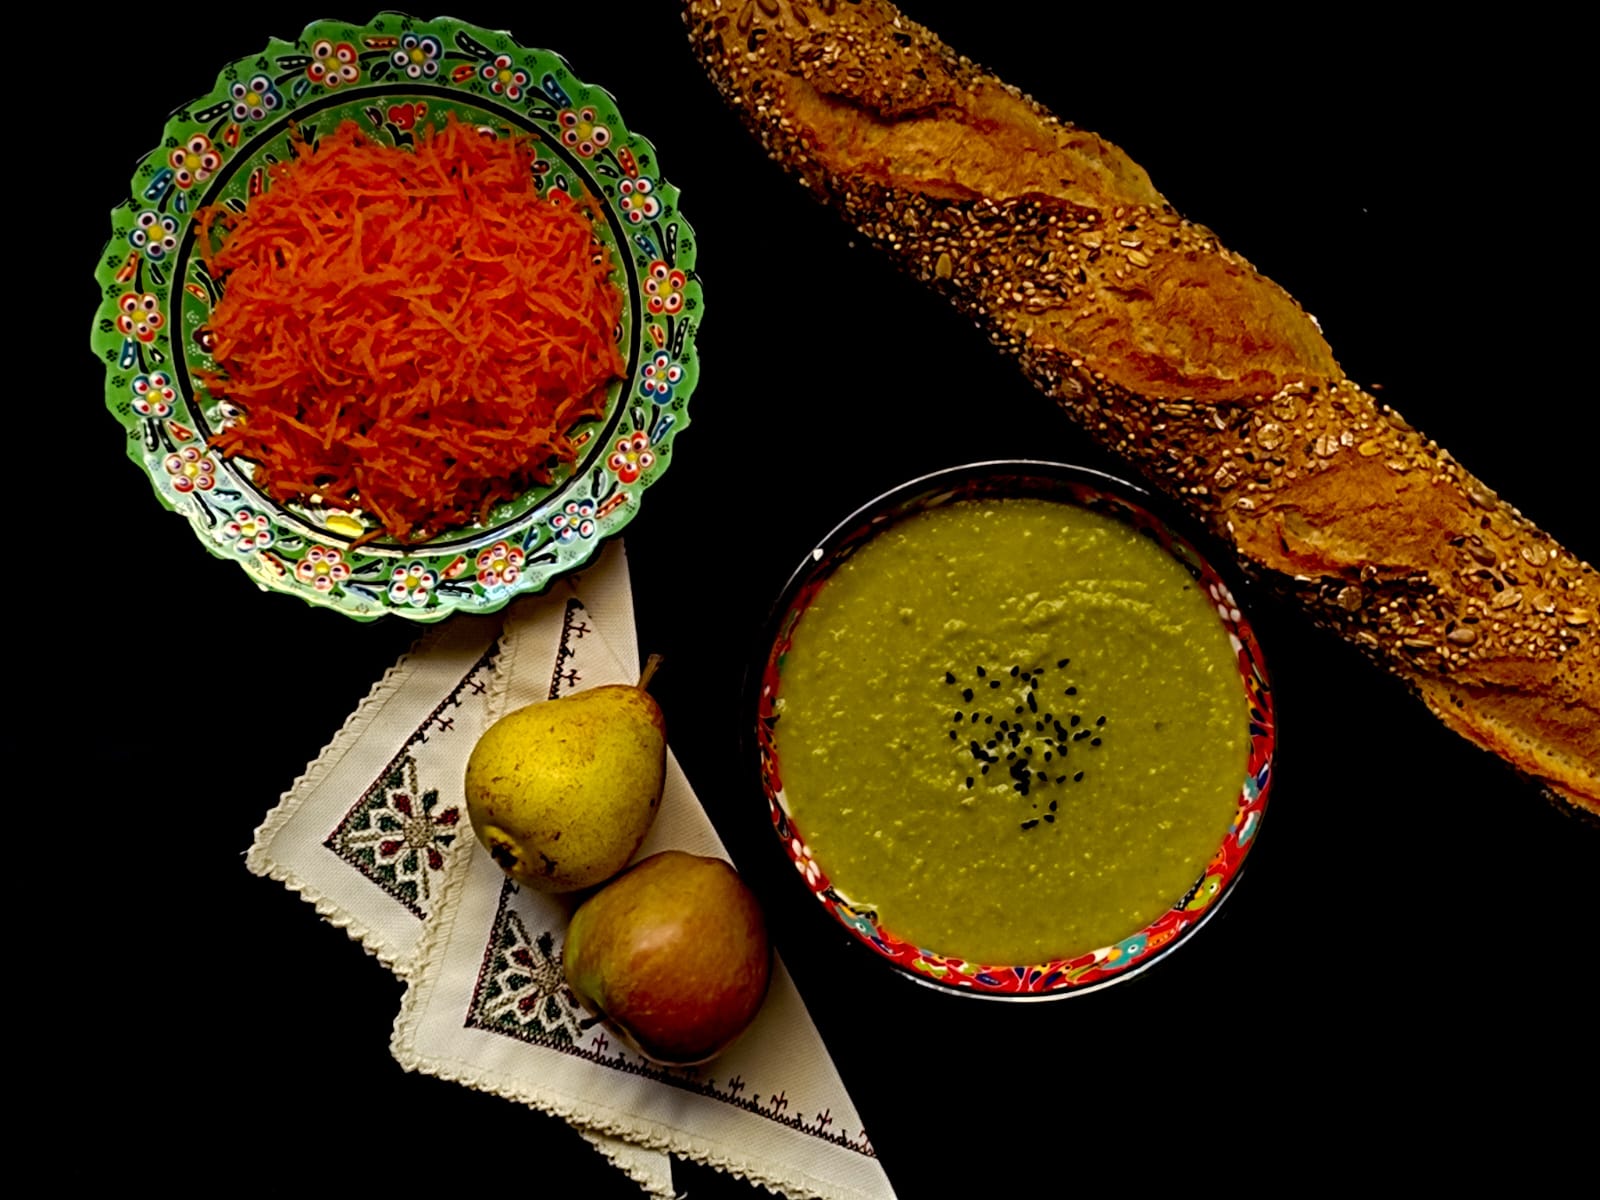 split pea soup served in a bowl with bread, carrots and some fruits